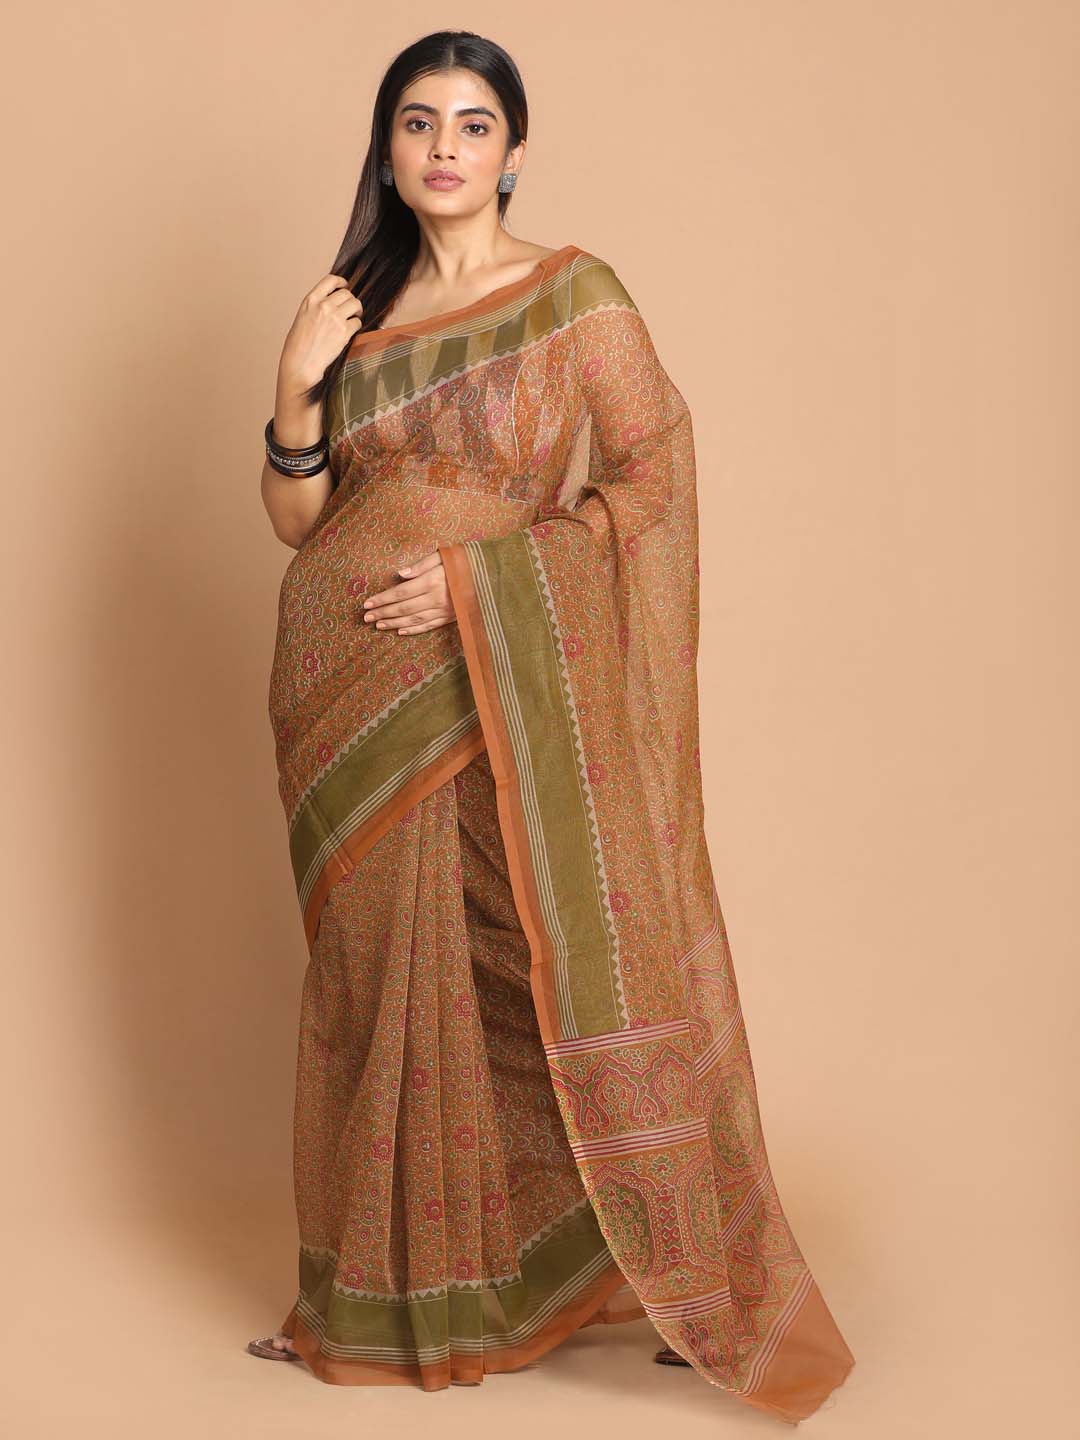 Indethnic Printed Cotton Blend Saree in Tan - View 2